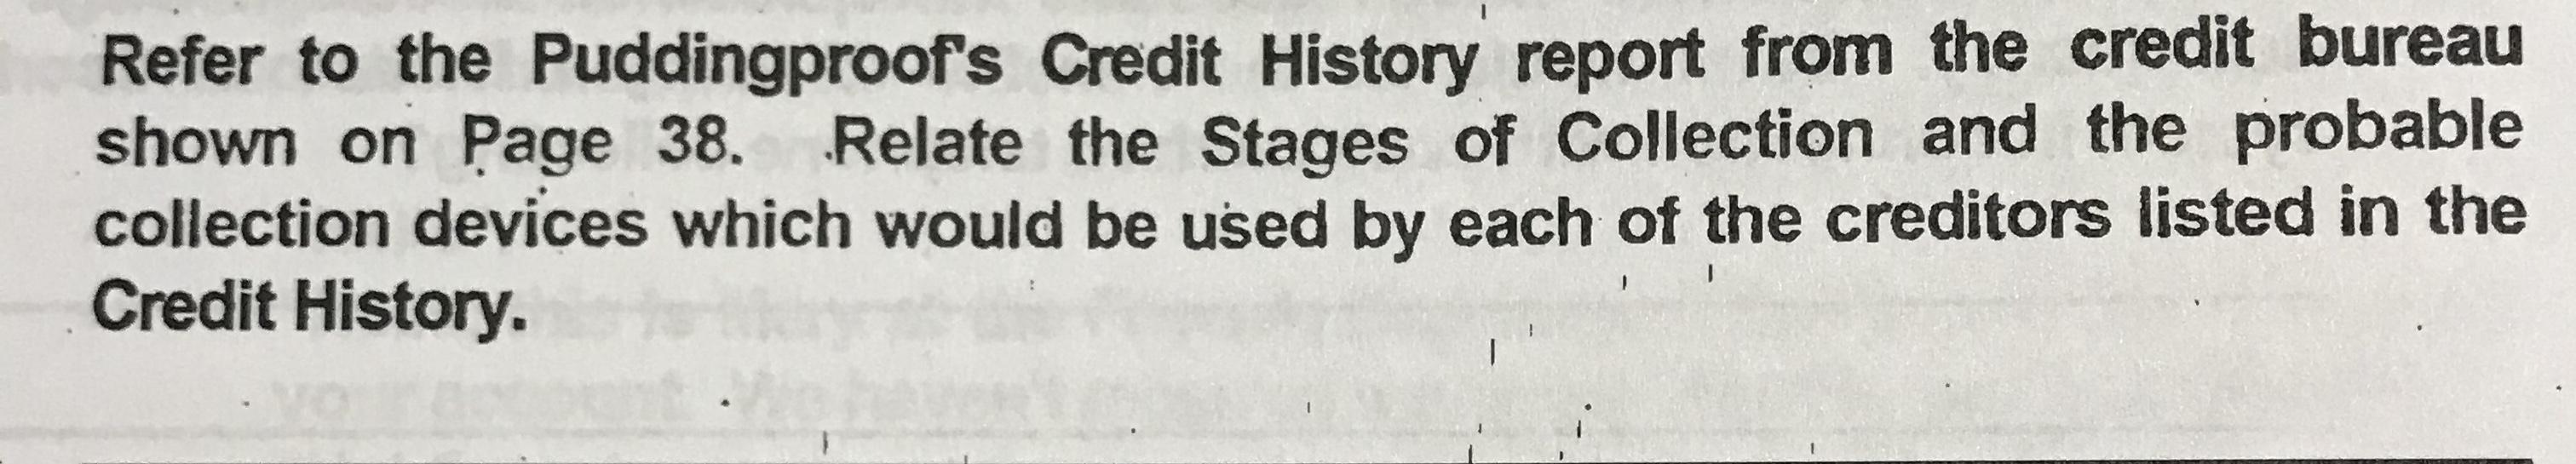 Refer to the Puddingproof's Credit History report from the credit bureau shown on Page 38. Relate the Stages